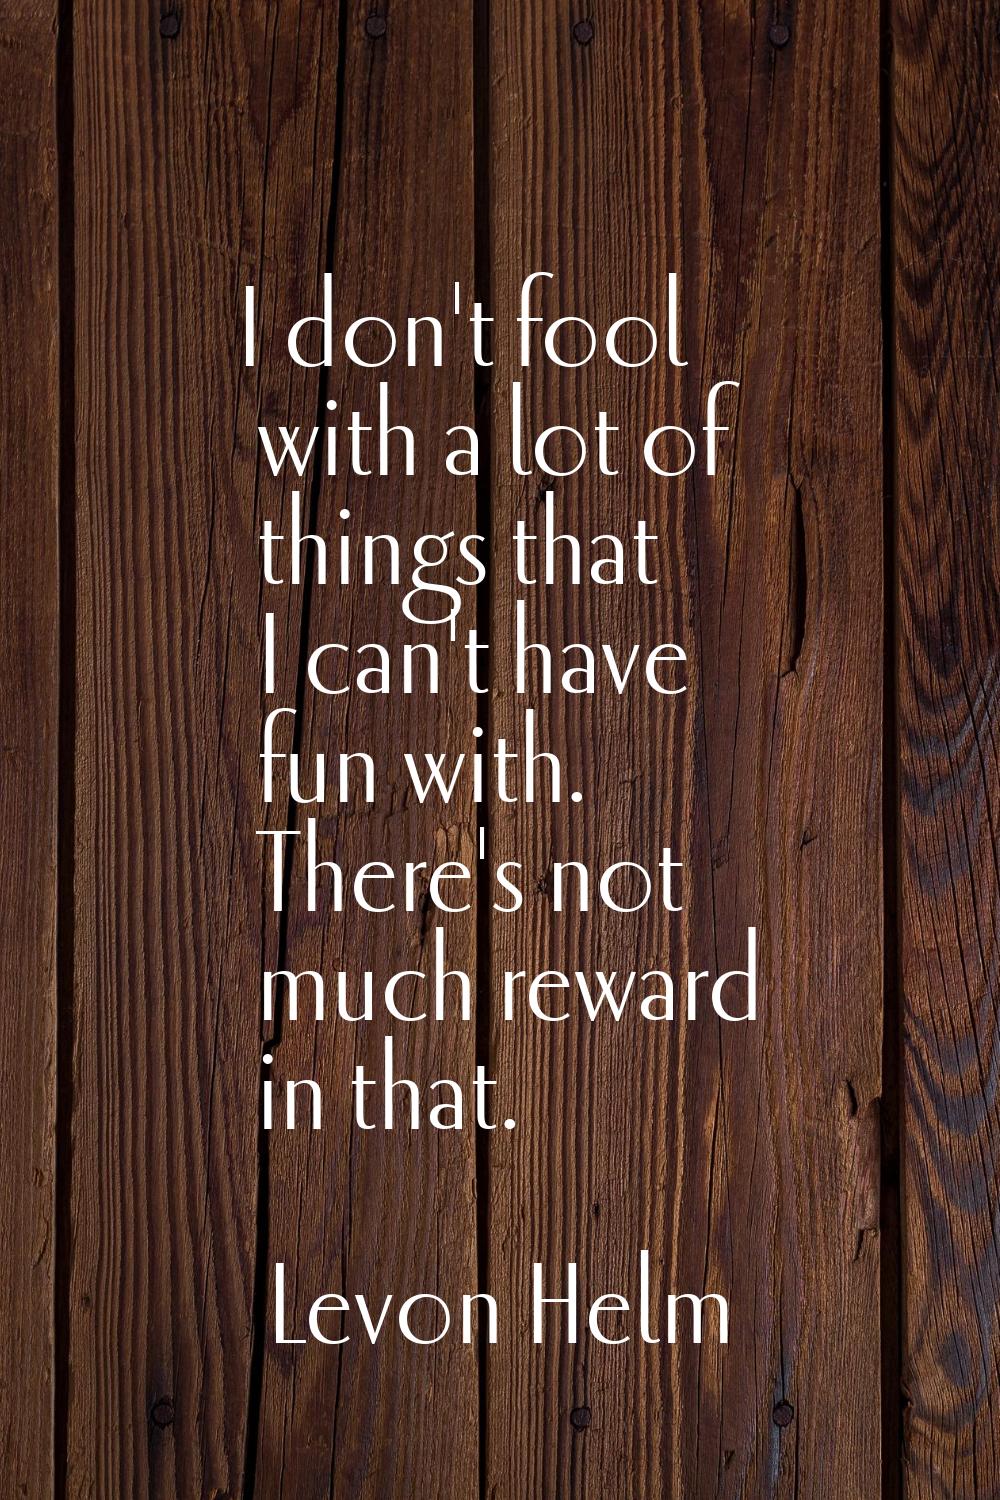 I don't fool with a lot of things that I can't have fun with. There's not much reward in that.